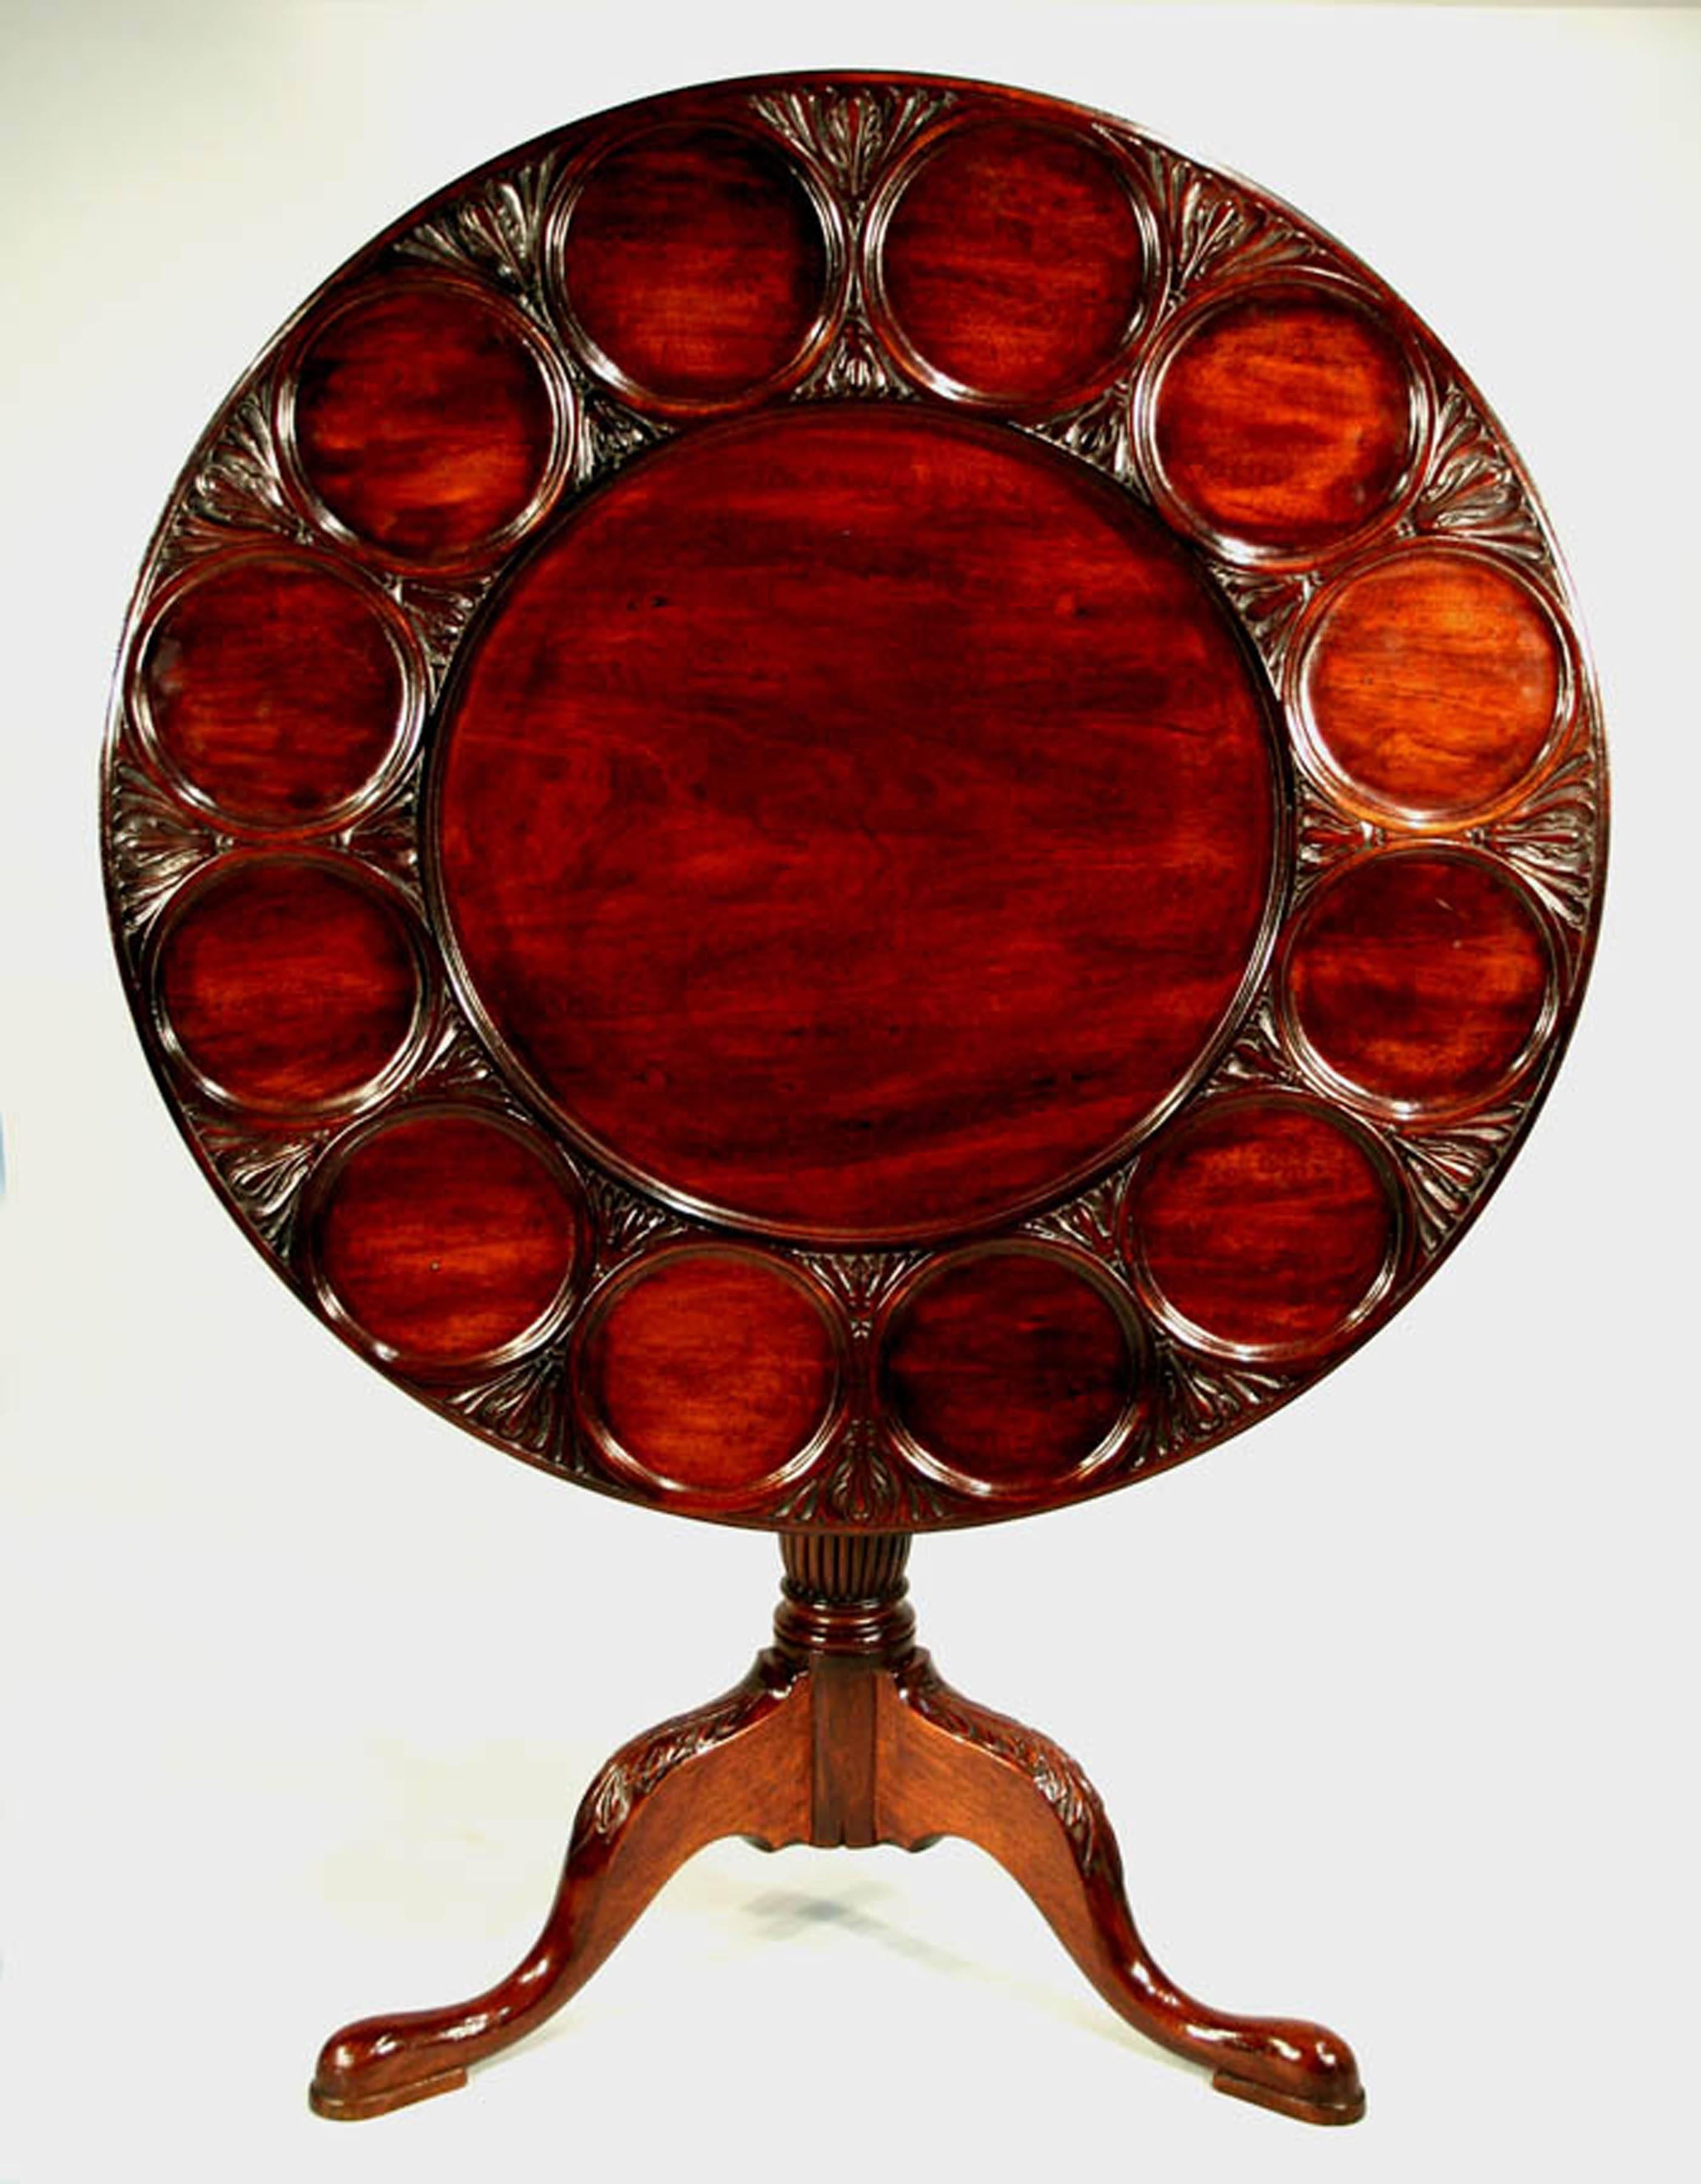 Fine antique English supper table in mahogany, having
a circular, carved tilt top above a turned pillar and 
raised on cabriole legs with acanthus carved knees and 
pad feet. Circa 1840-500.

Diameter: 34”
Height, open: 28”